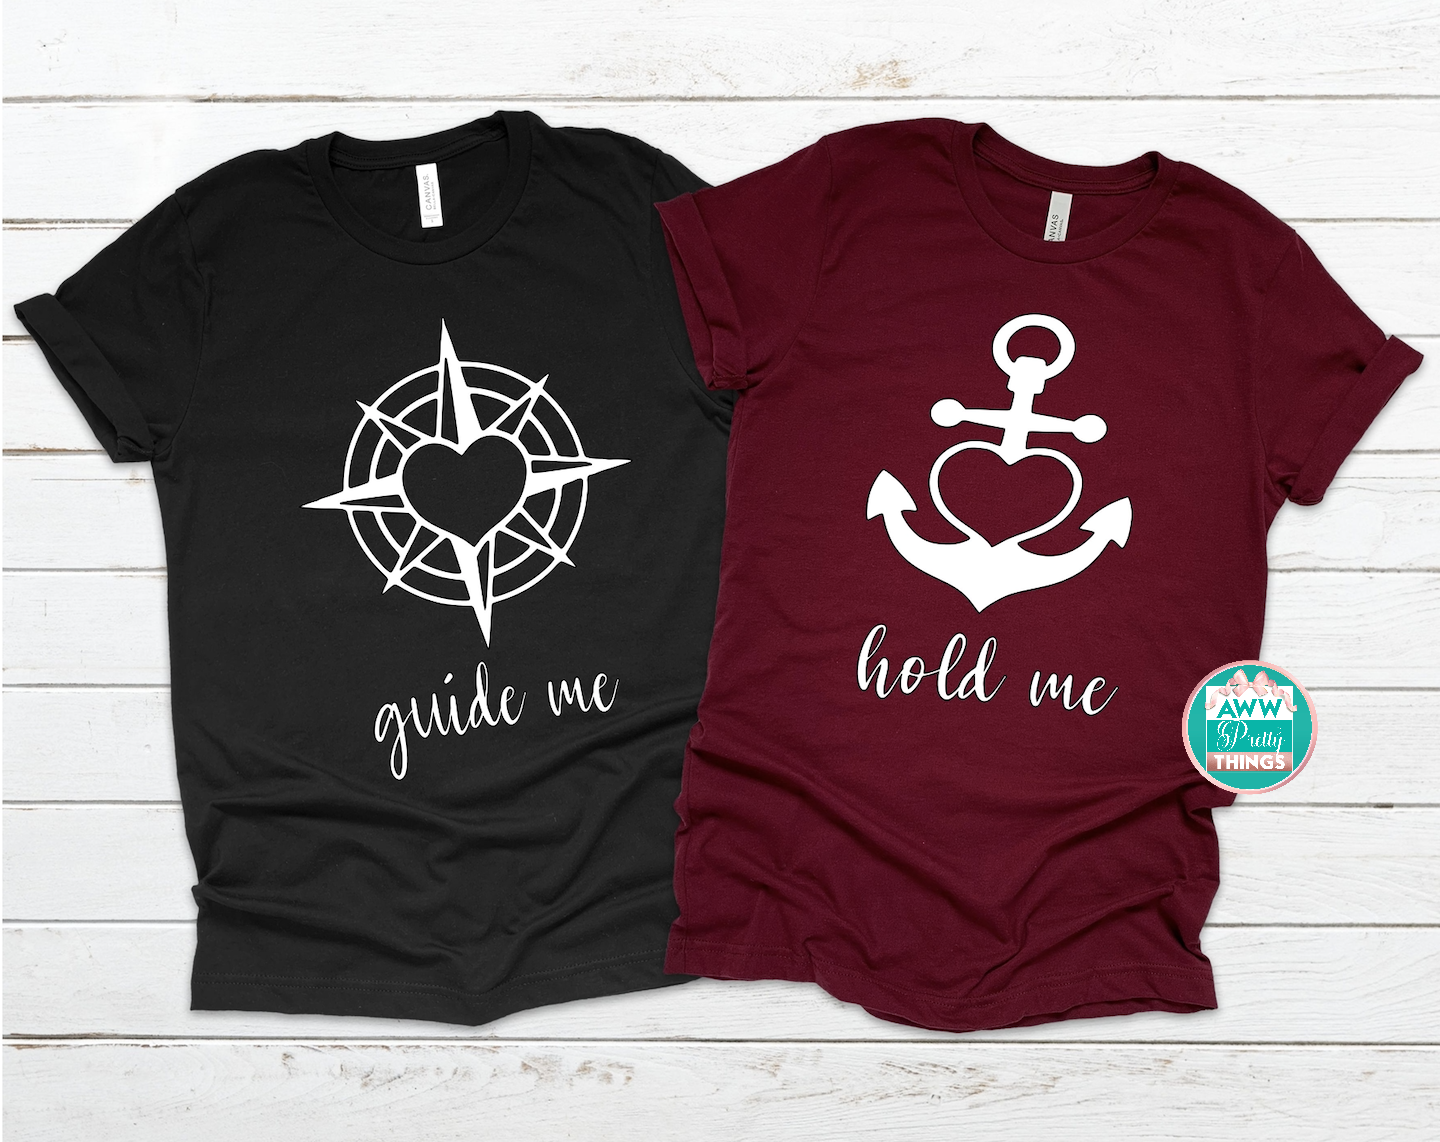 Guide Me Hold Me Couples Shirts